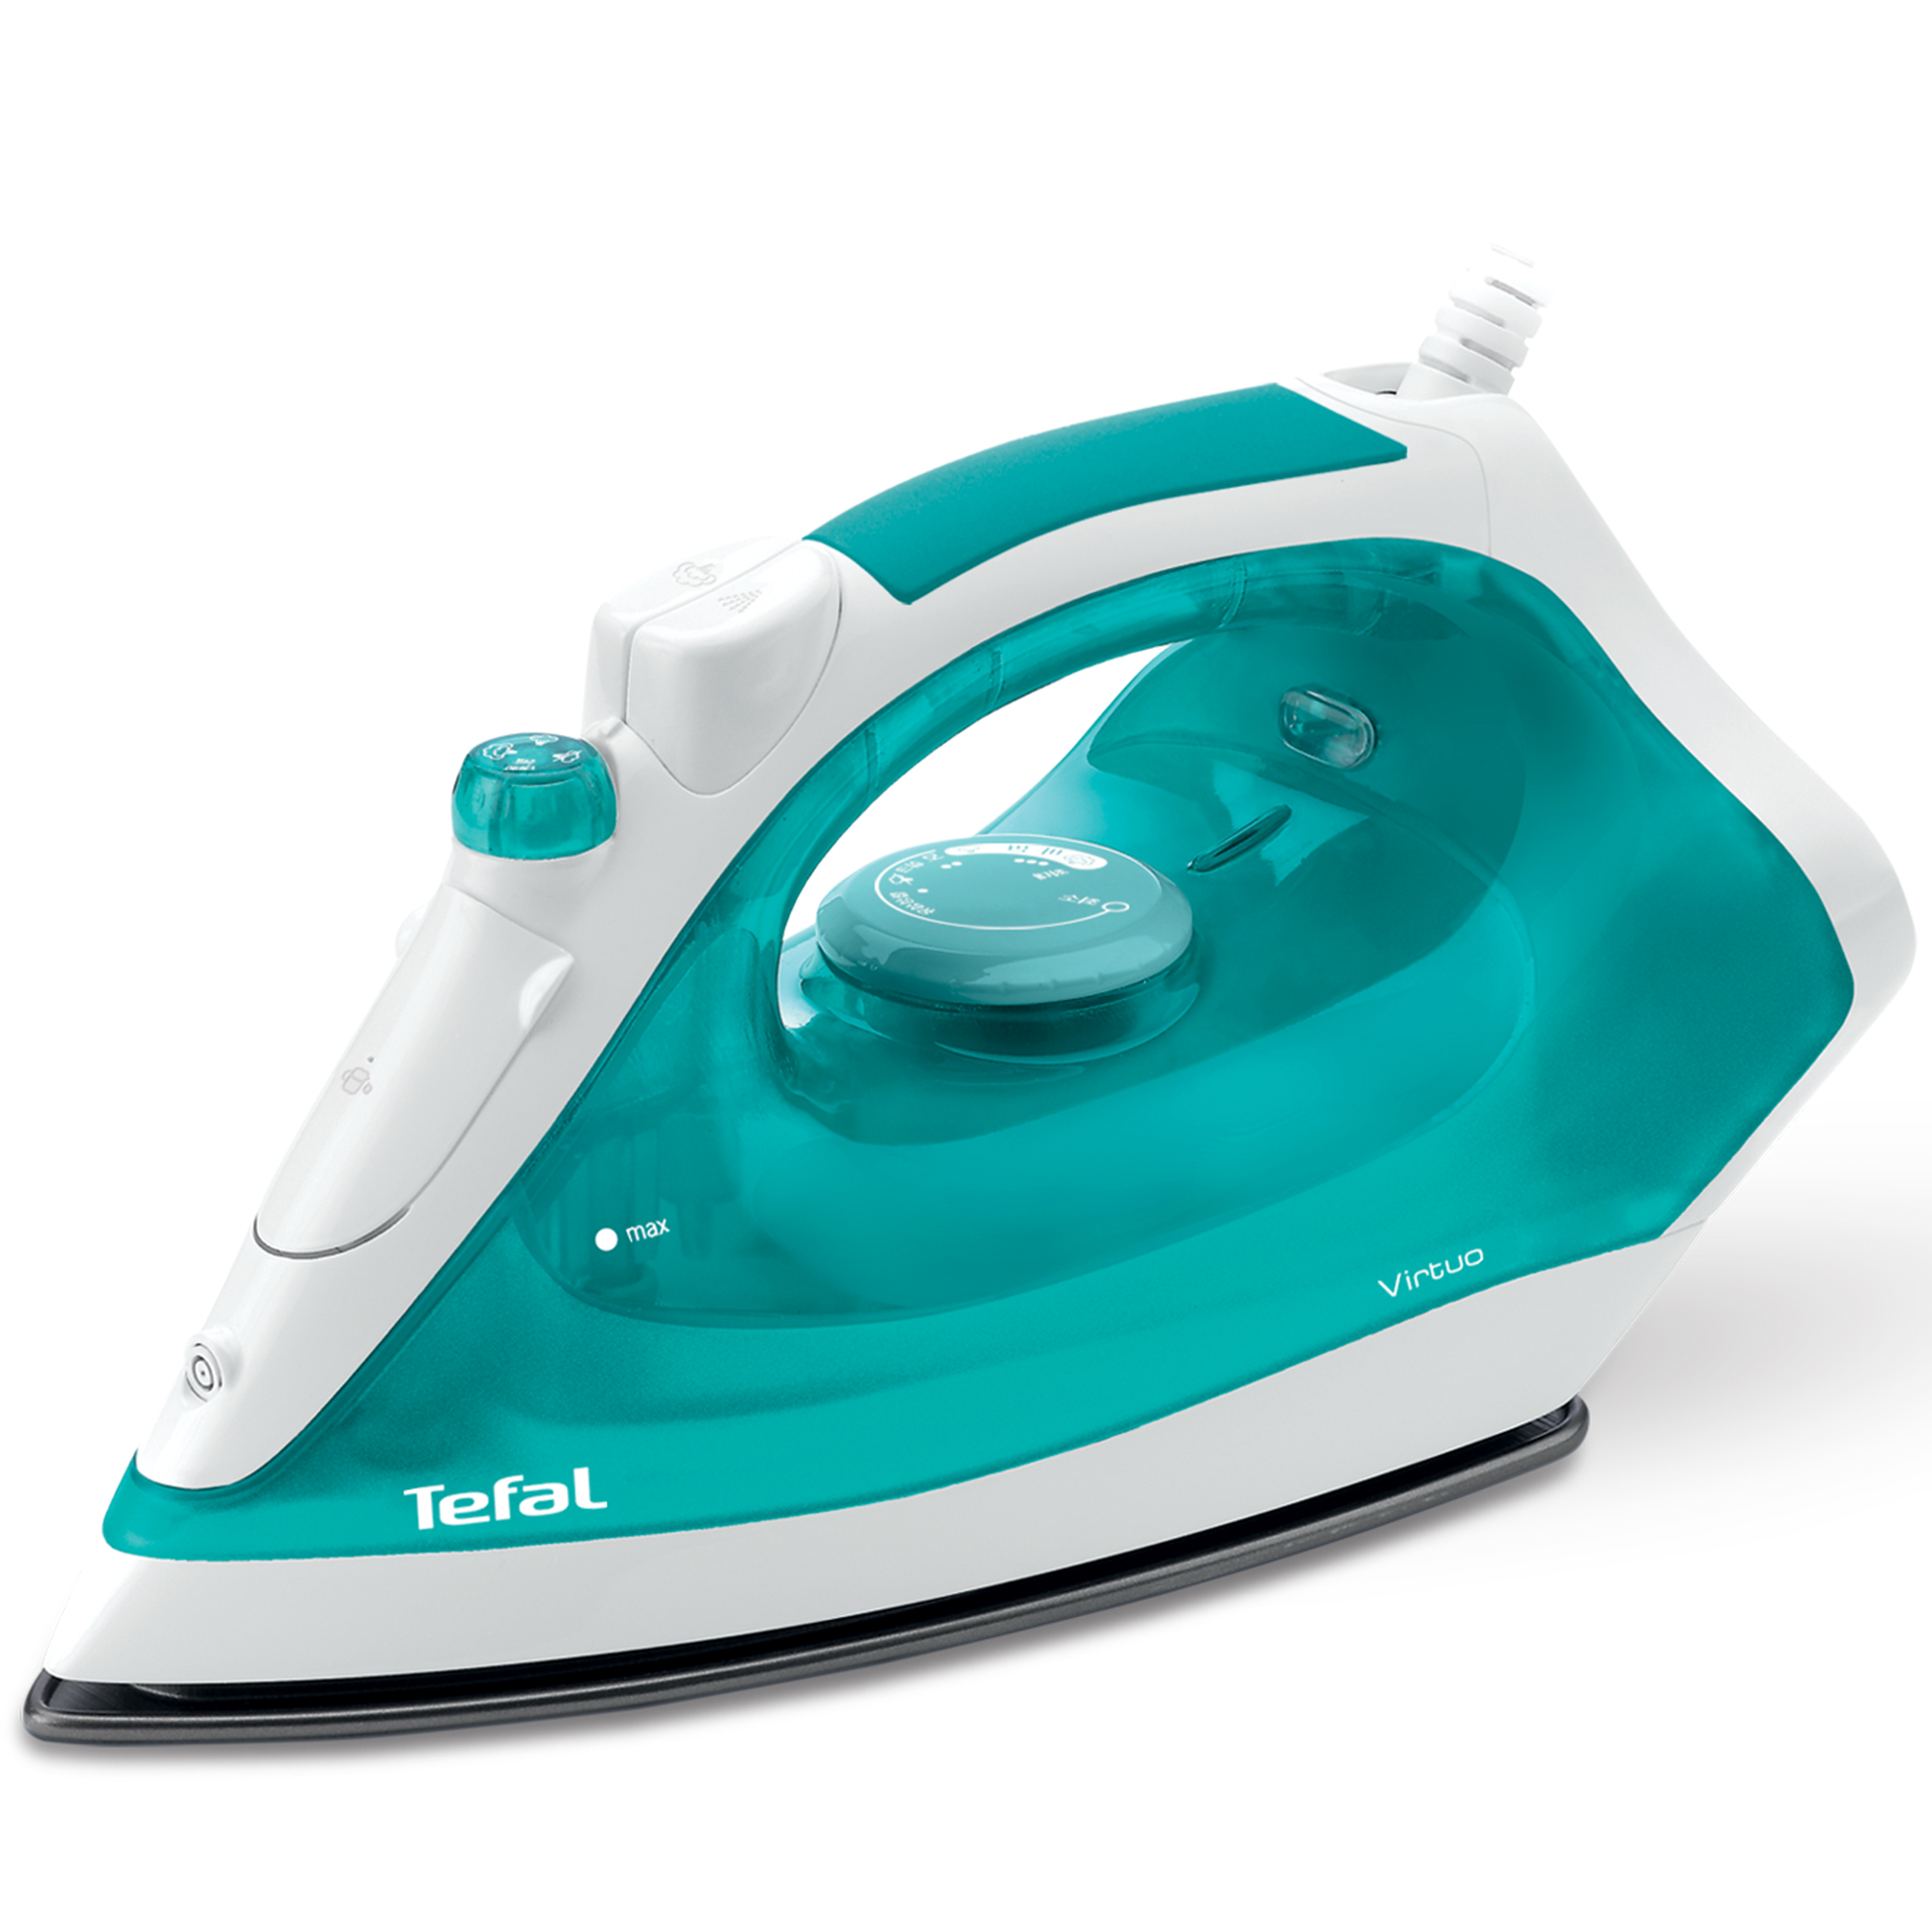 Tefal Steam Iron Virtuo